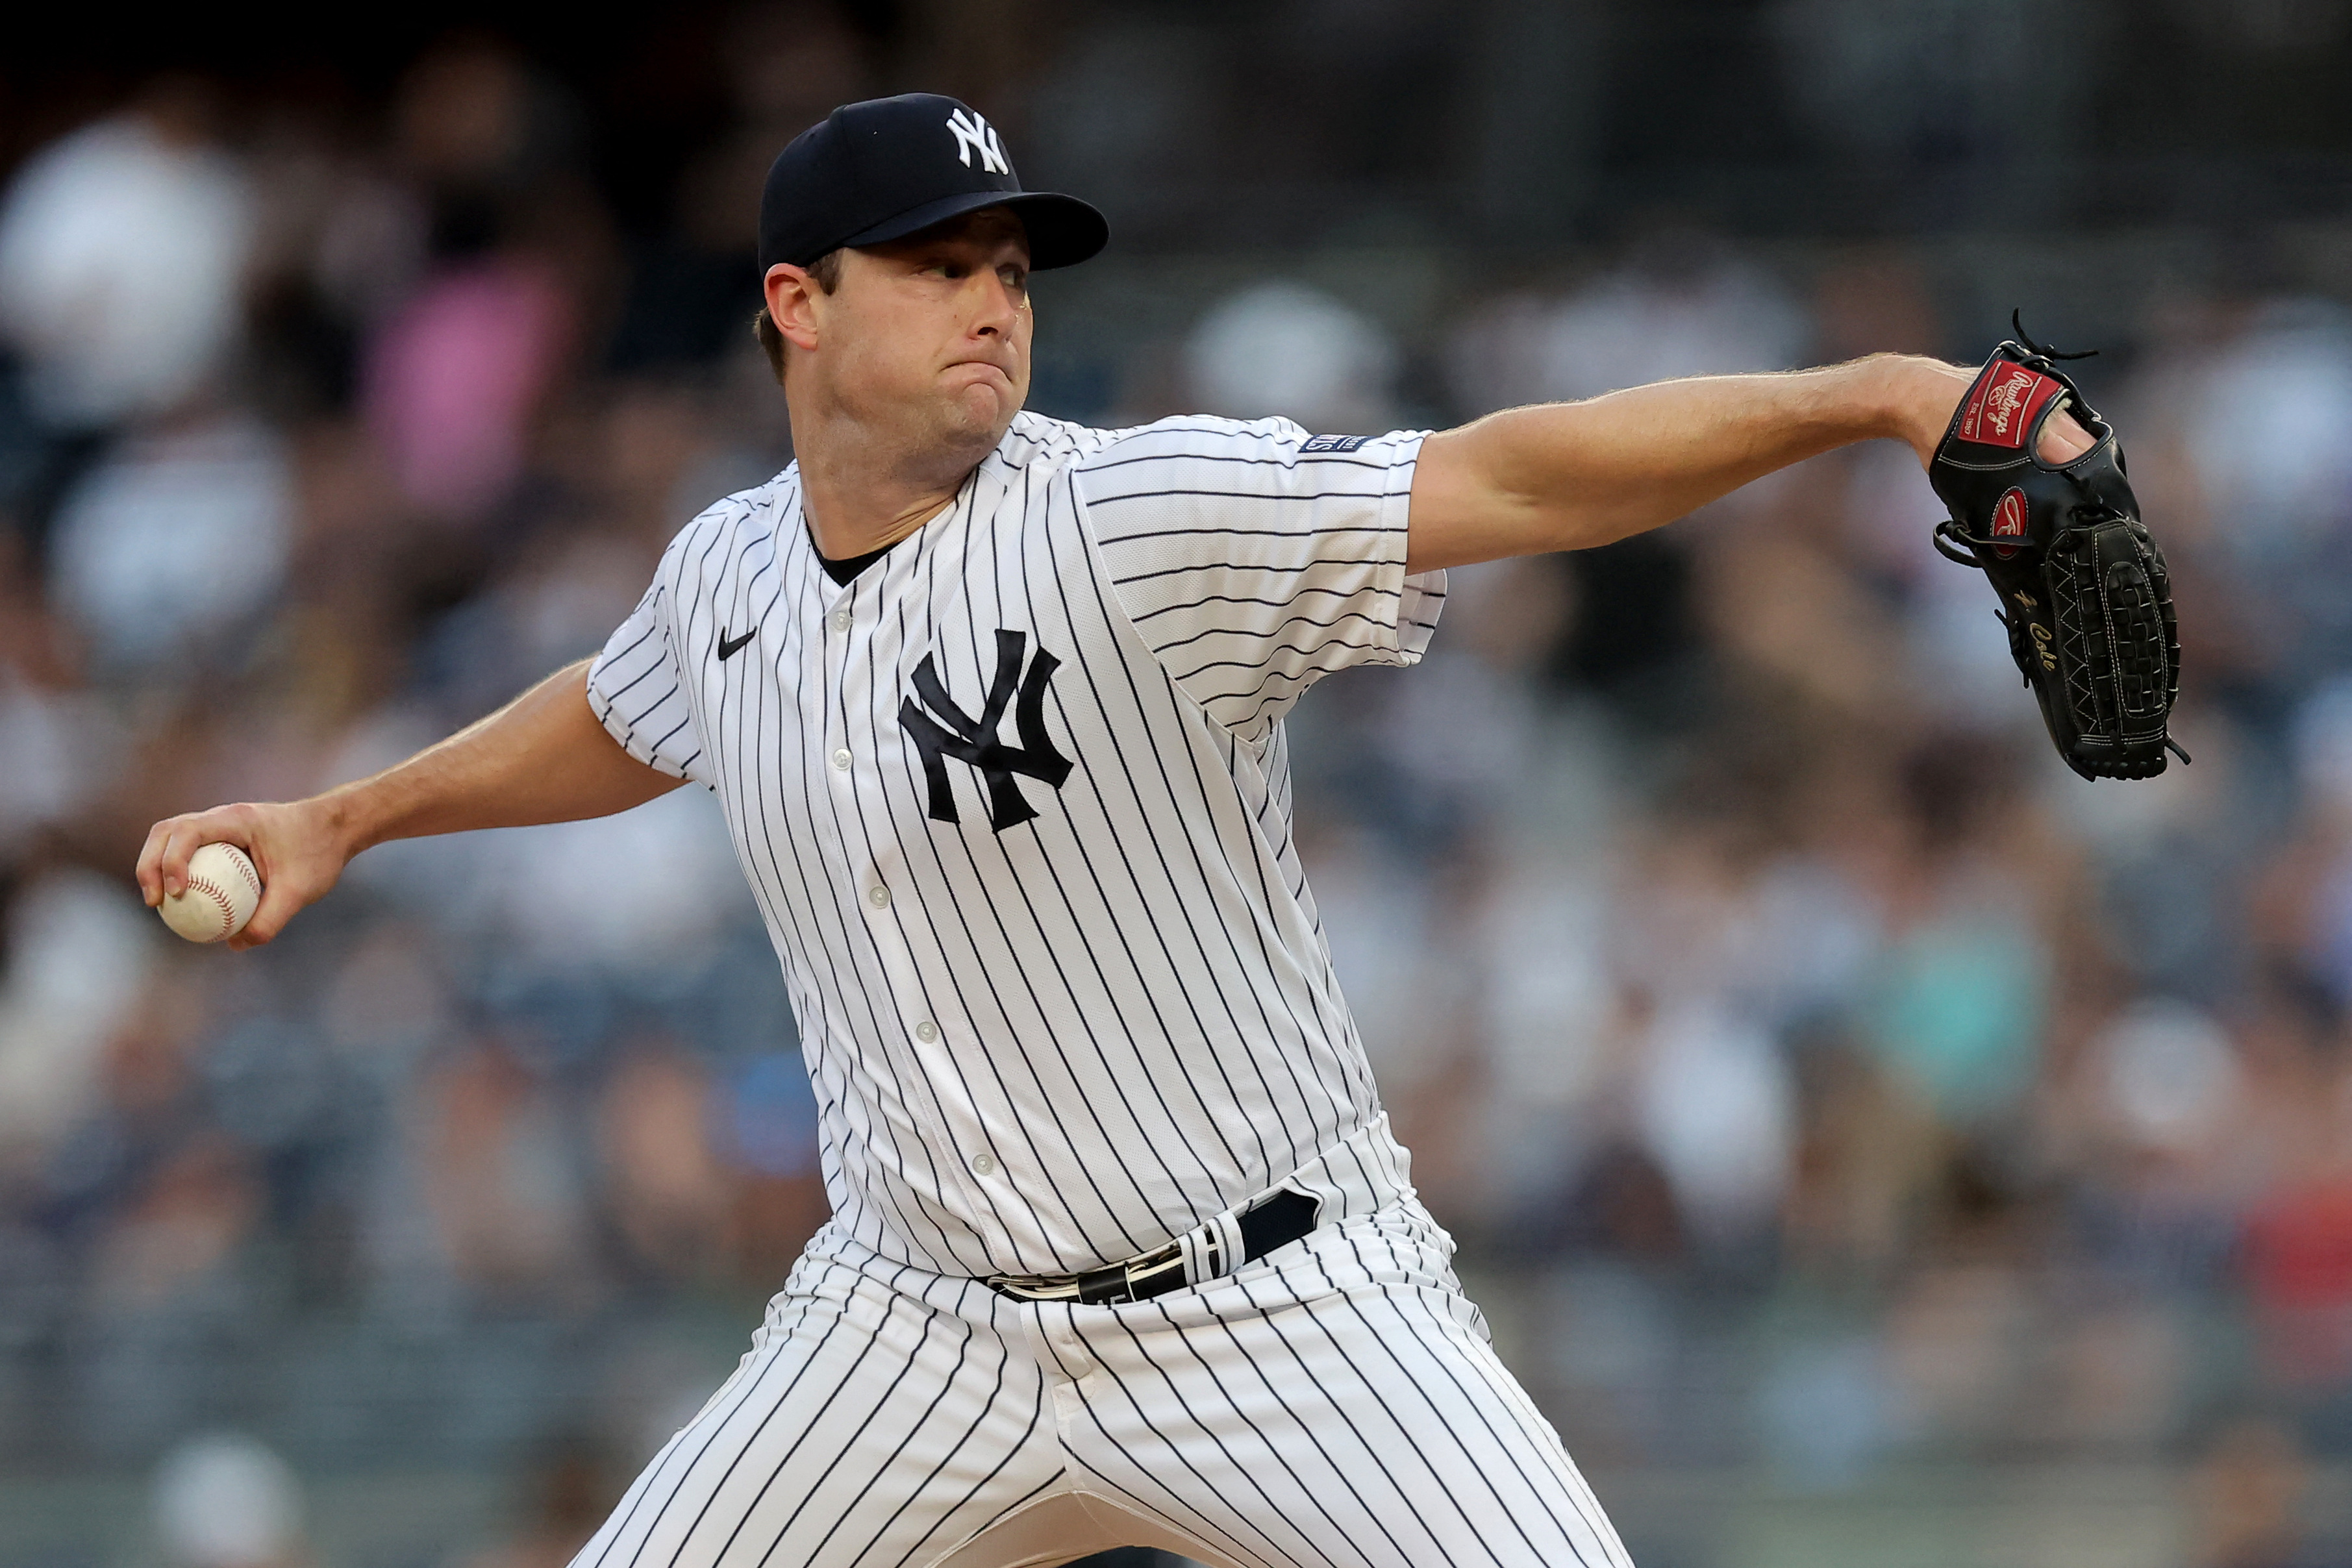 Yankees' pitcher makes his debut and leaves opposing hitters raving 